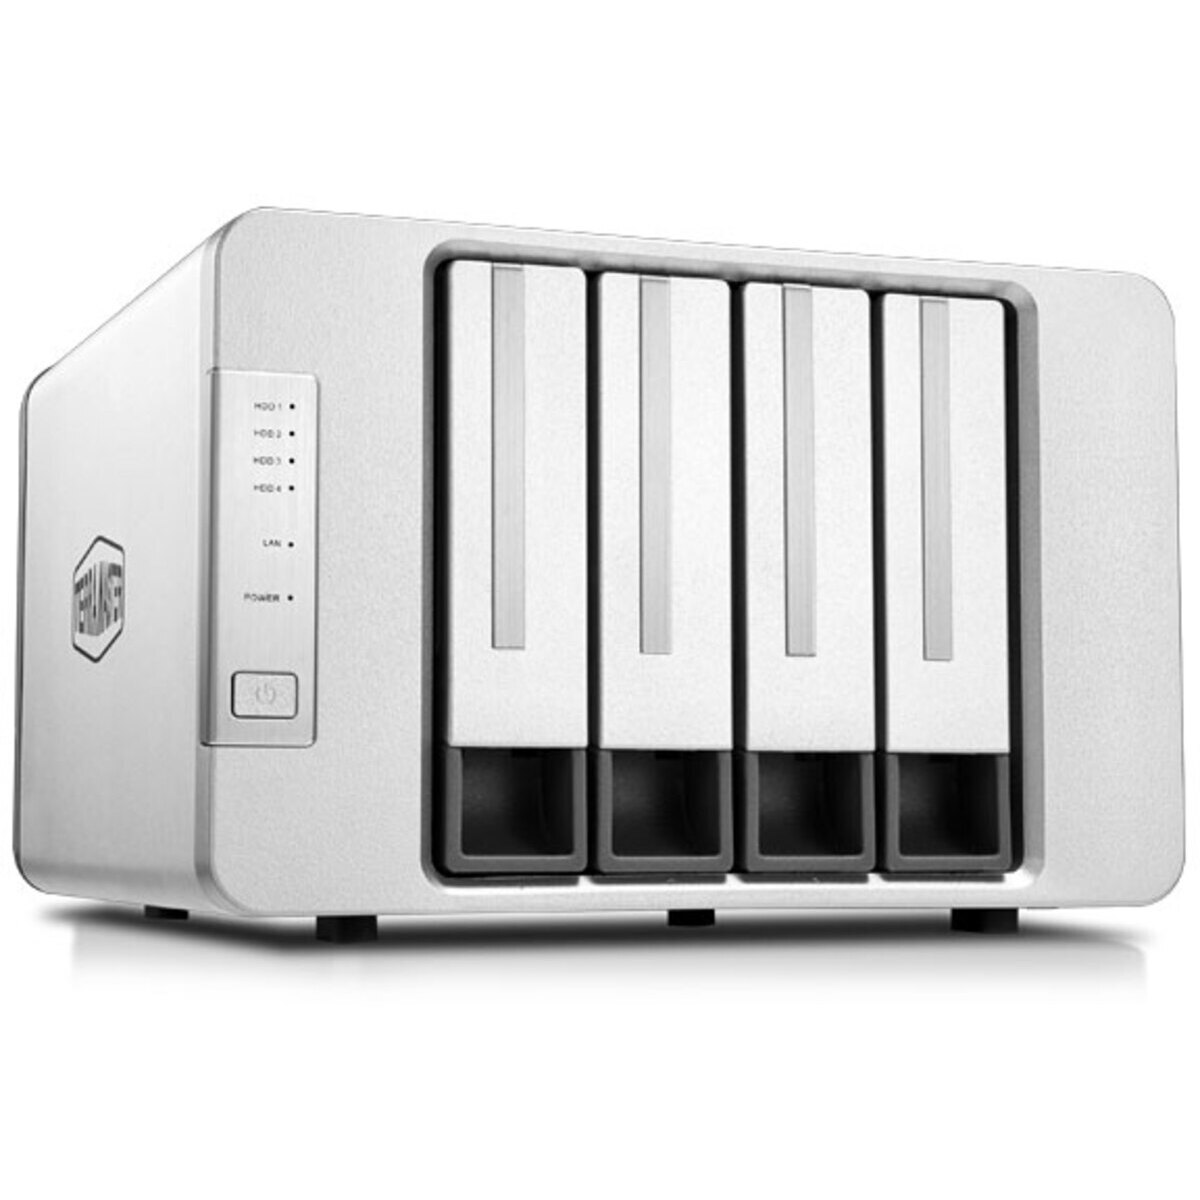 TerraMaster F4-223 48tb 4-Bay Desktop Personal / Basic Home / Small Office NAS - Network Attached Storage Device 4x12tb Seagate EXOS X18 ST12000NM000J 3.5 7200rpm SATA 6Gb/s HDD ENTERPRISE Class Drives Installed - Burn-In Tested - FREE RAM UPGRADE F4-223